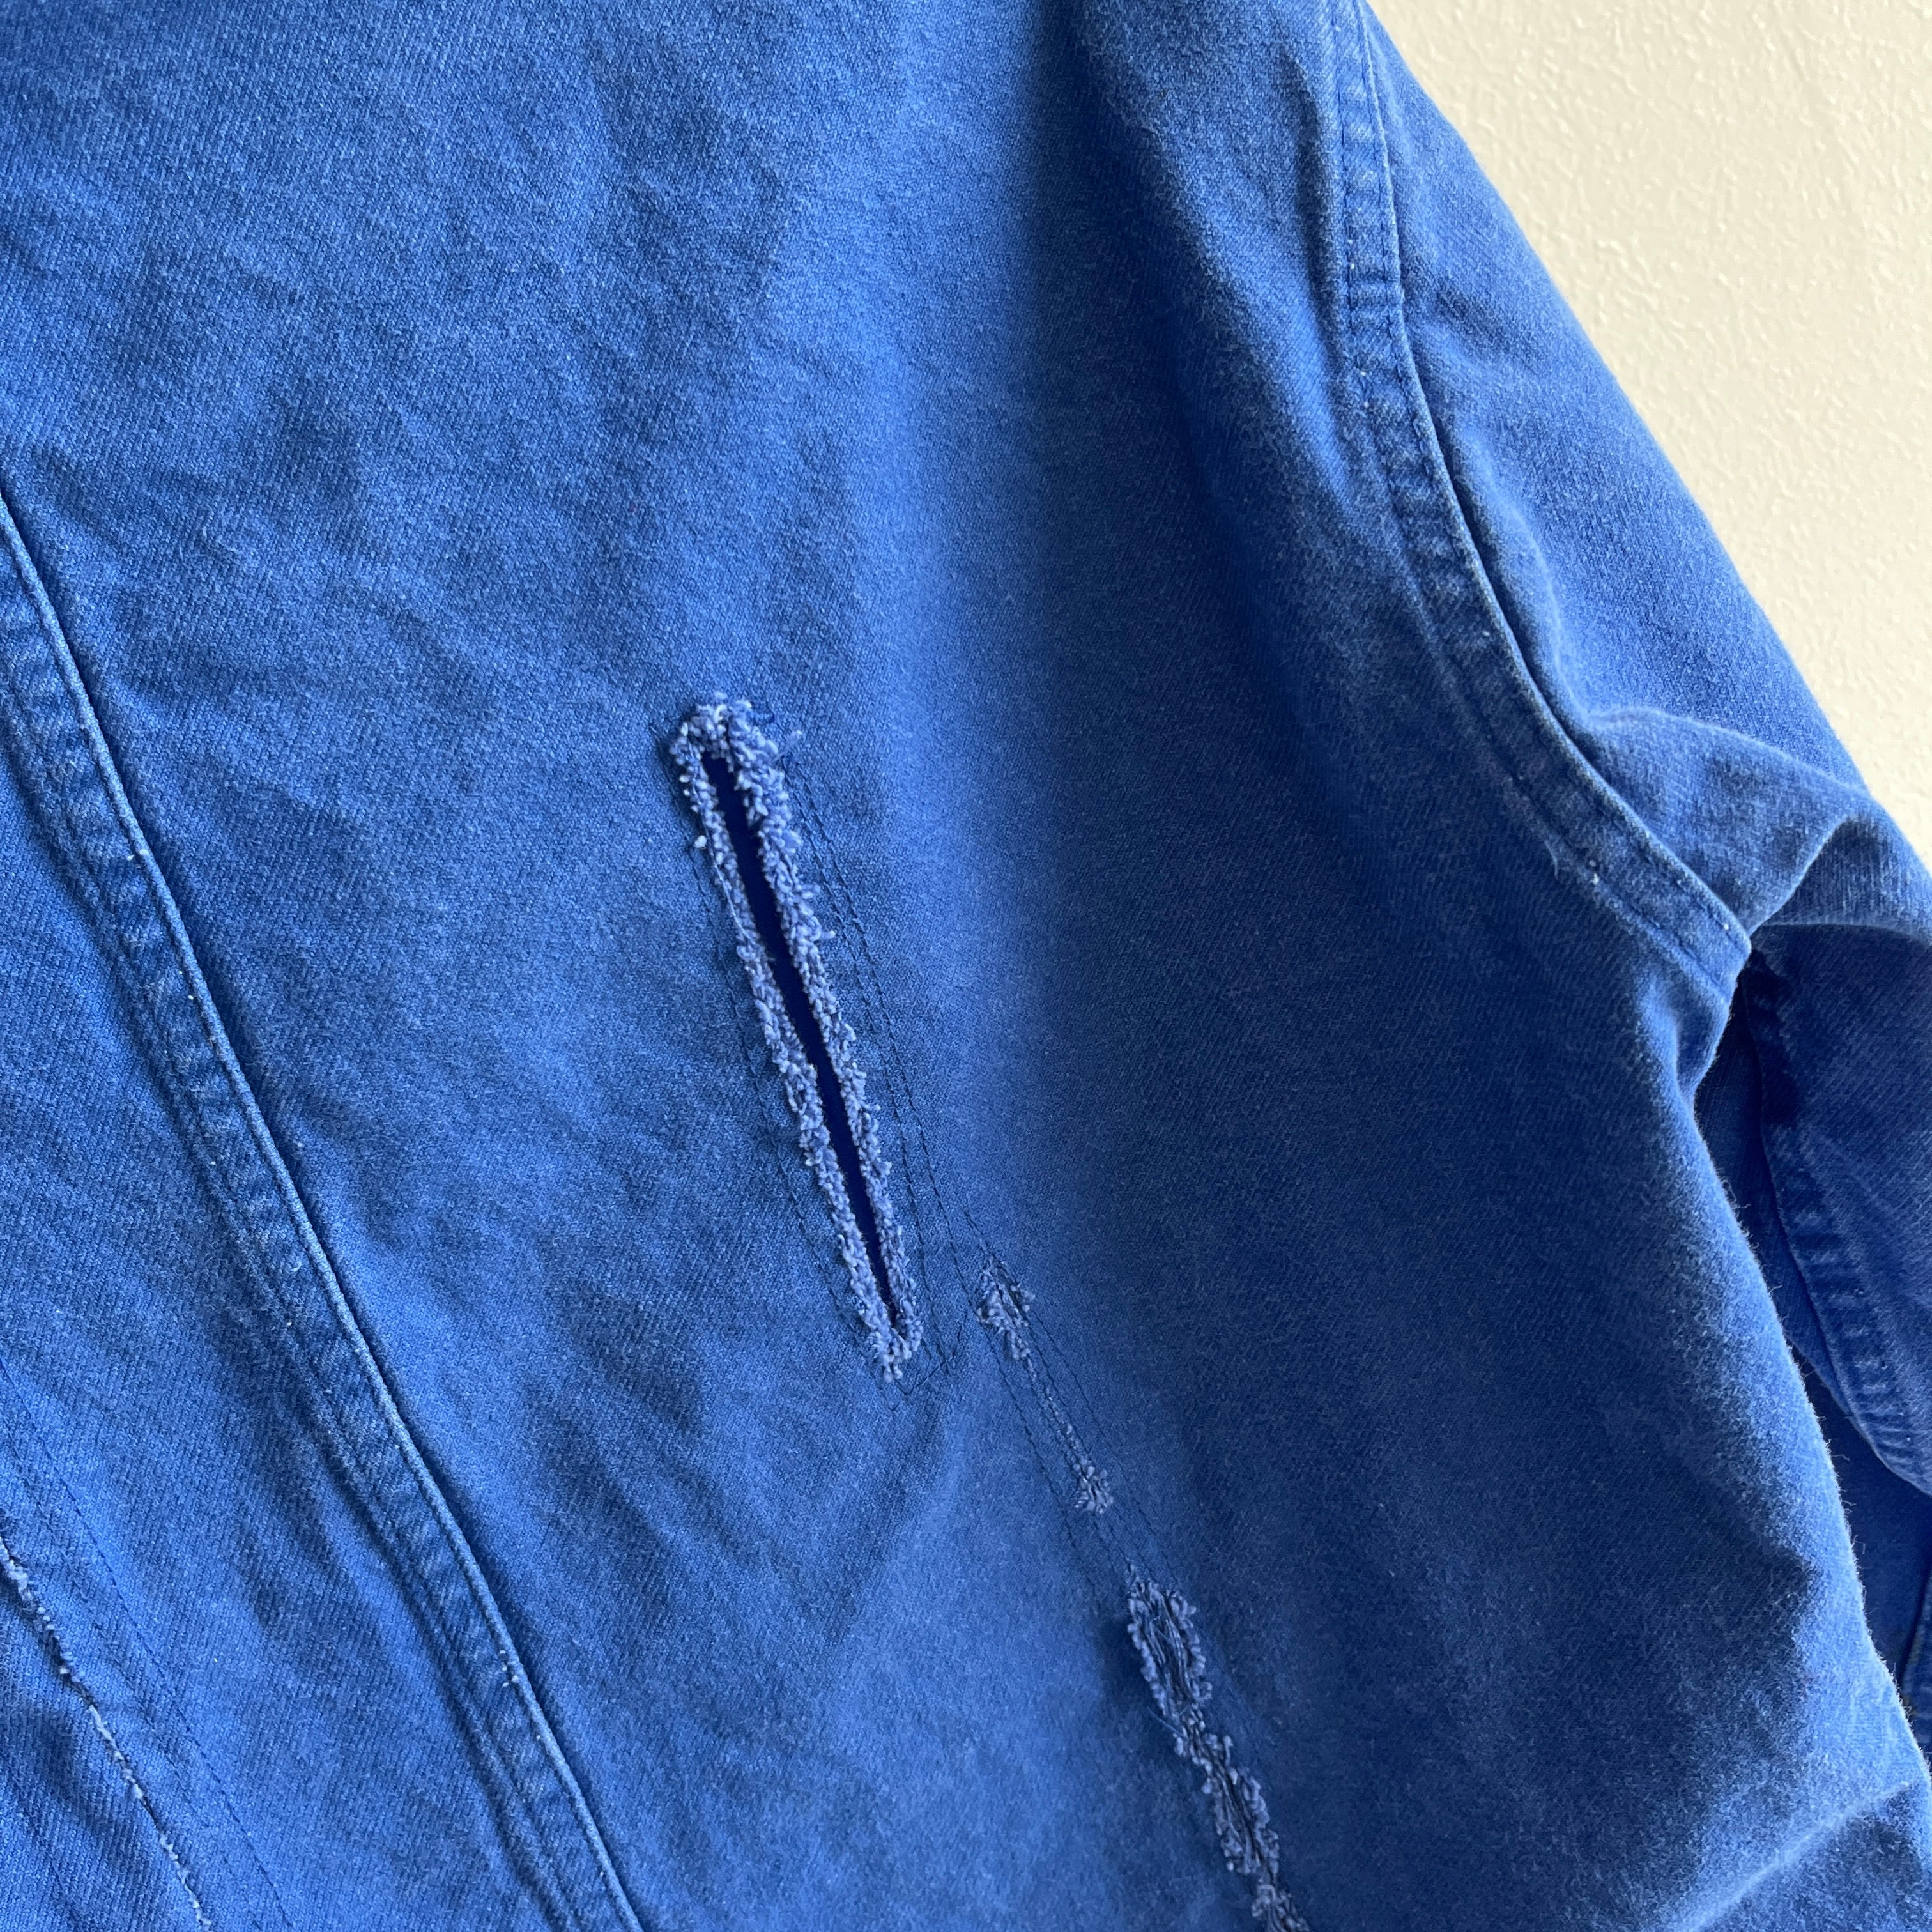 1980s Destroyed and Repaired Structured French Chore Coat